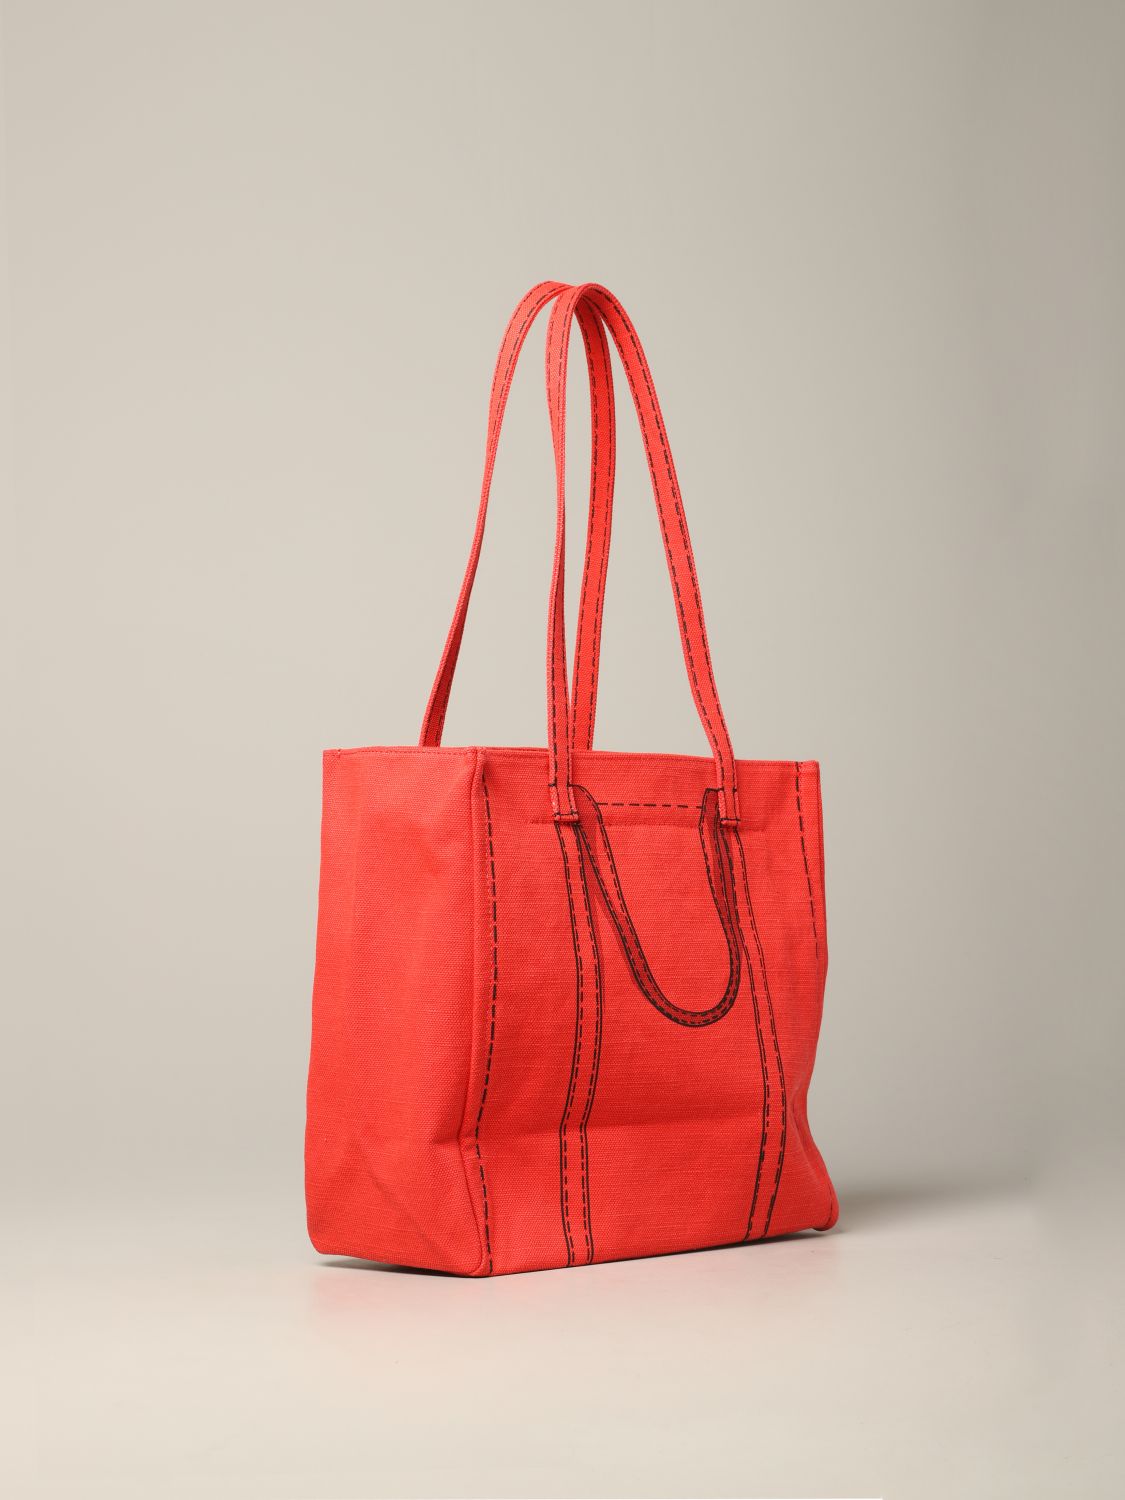 Marc Jacobs Outlet: Tote bags women | Tote Bags Marc Jacobs Women Red